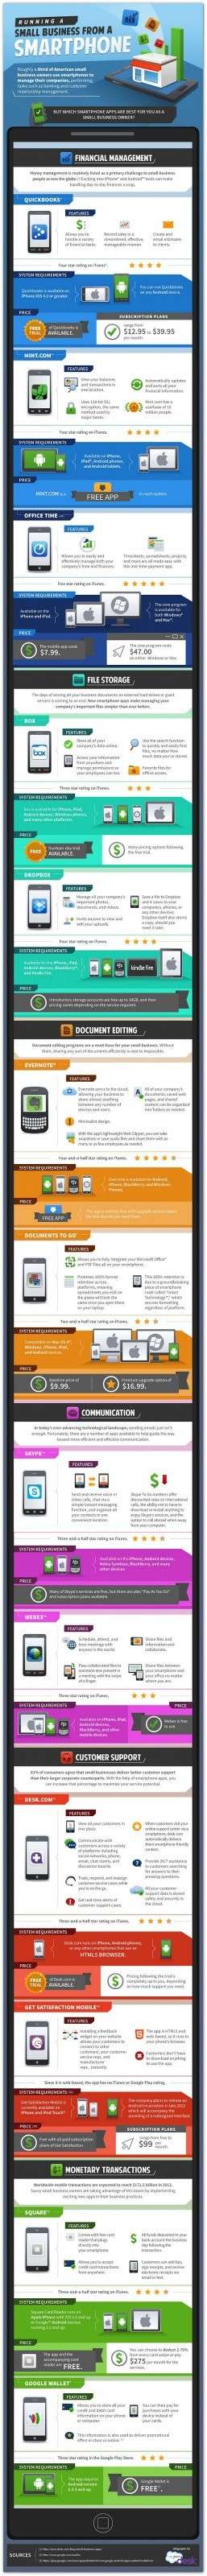 13 Business Apps for Busy Entrepreneurs (Infographic)  Small-10